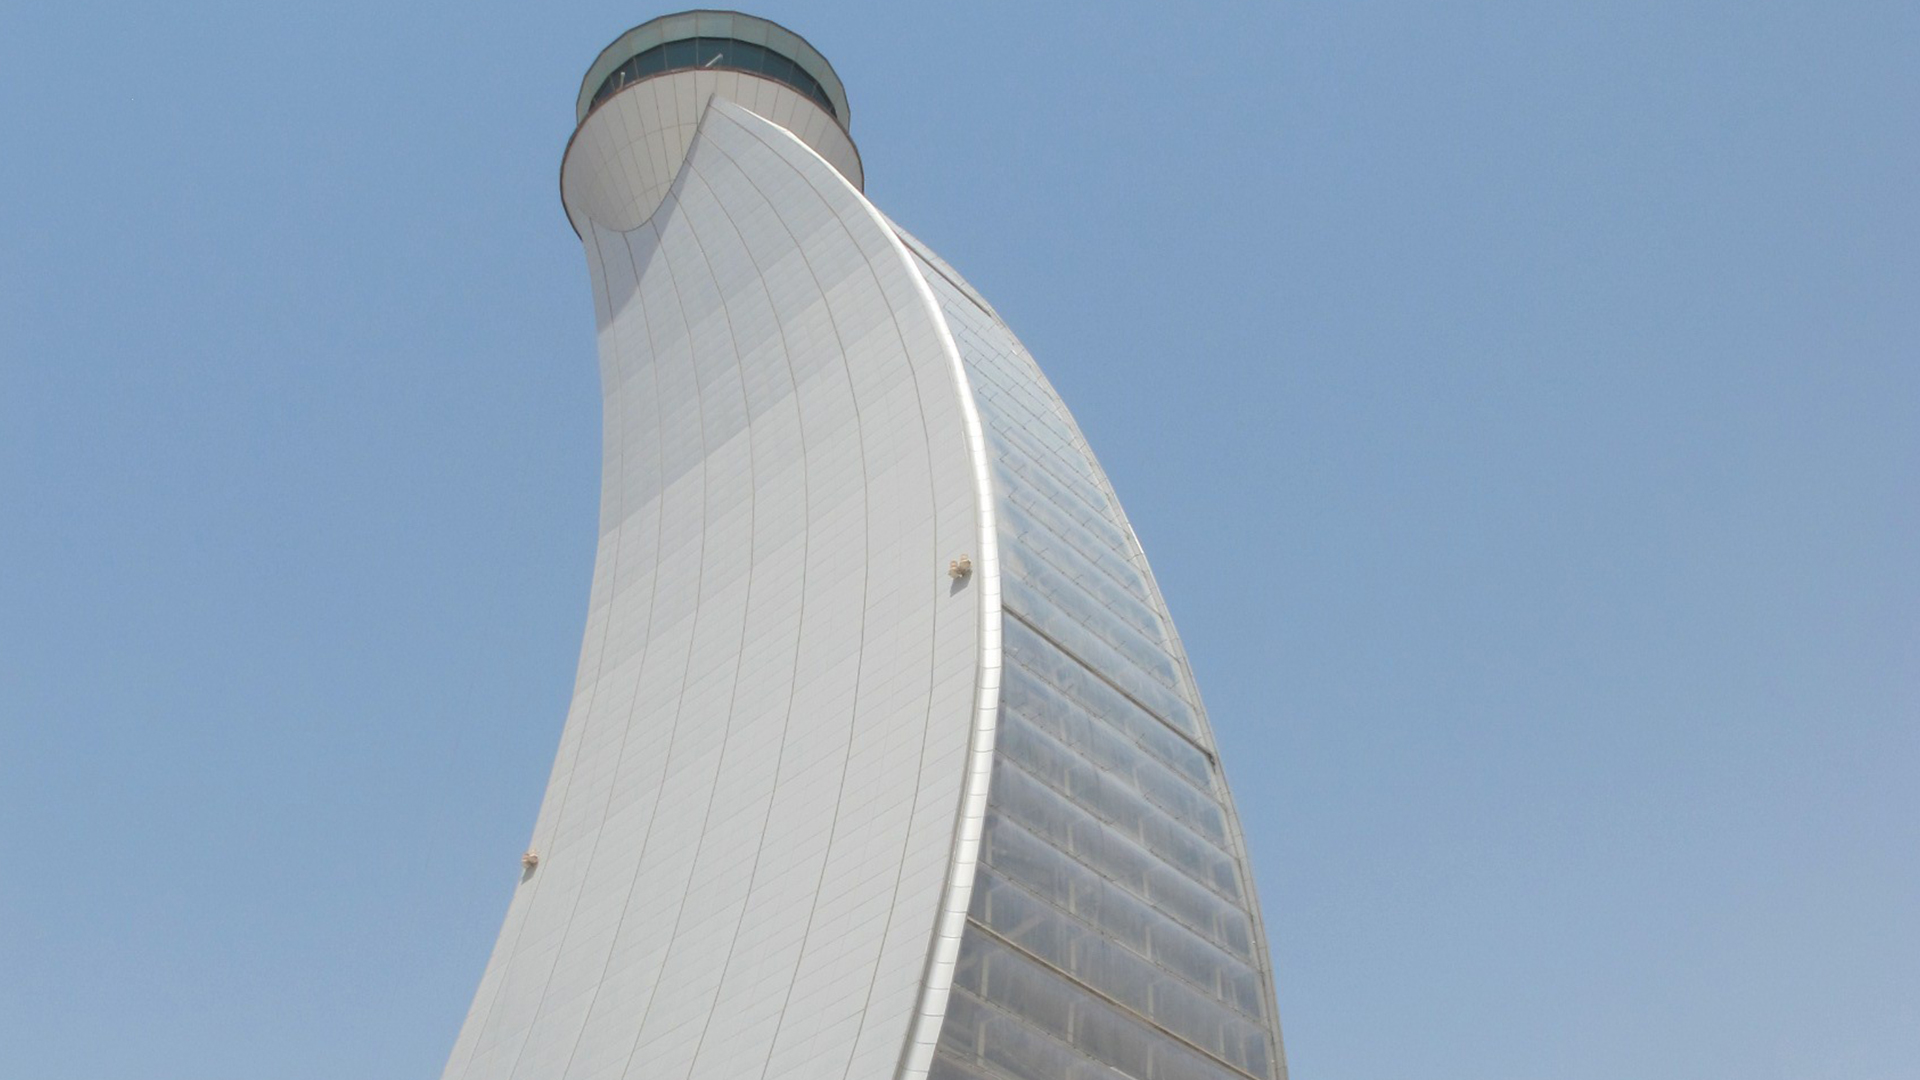 Air Traffic Control Tower at Abu Dhabi International Airport with Texlon® ETFE facades on both the east and west faces of the building.